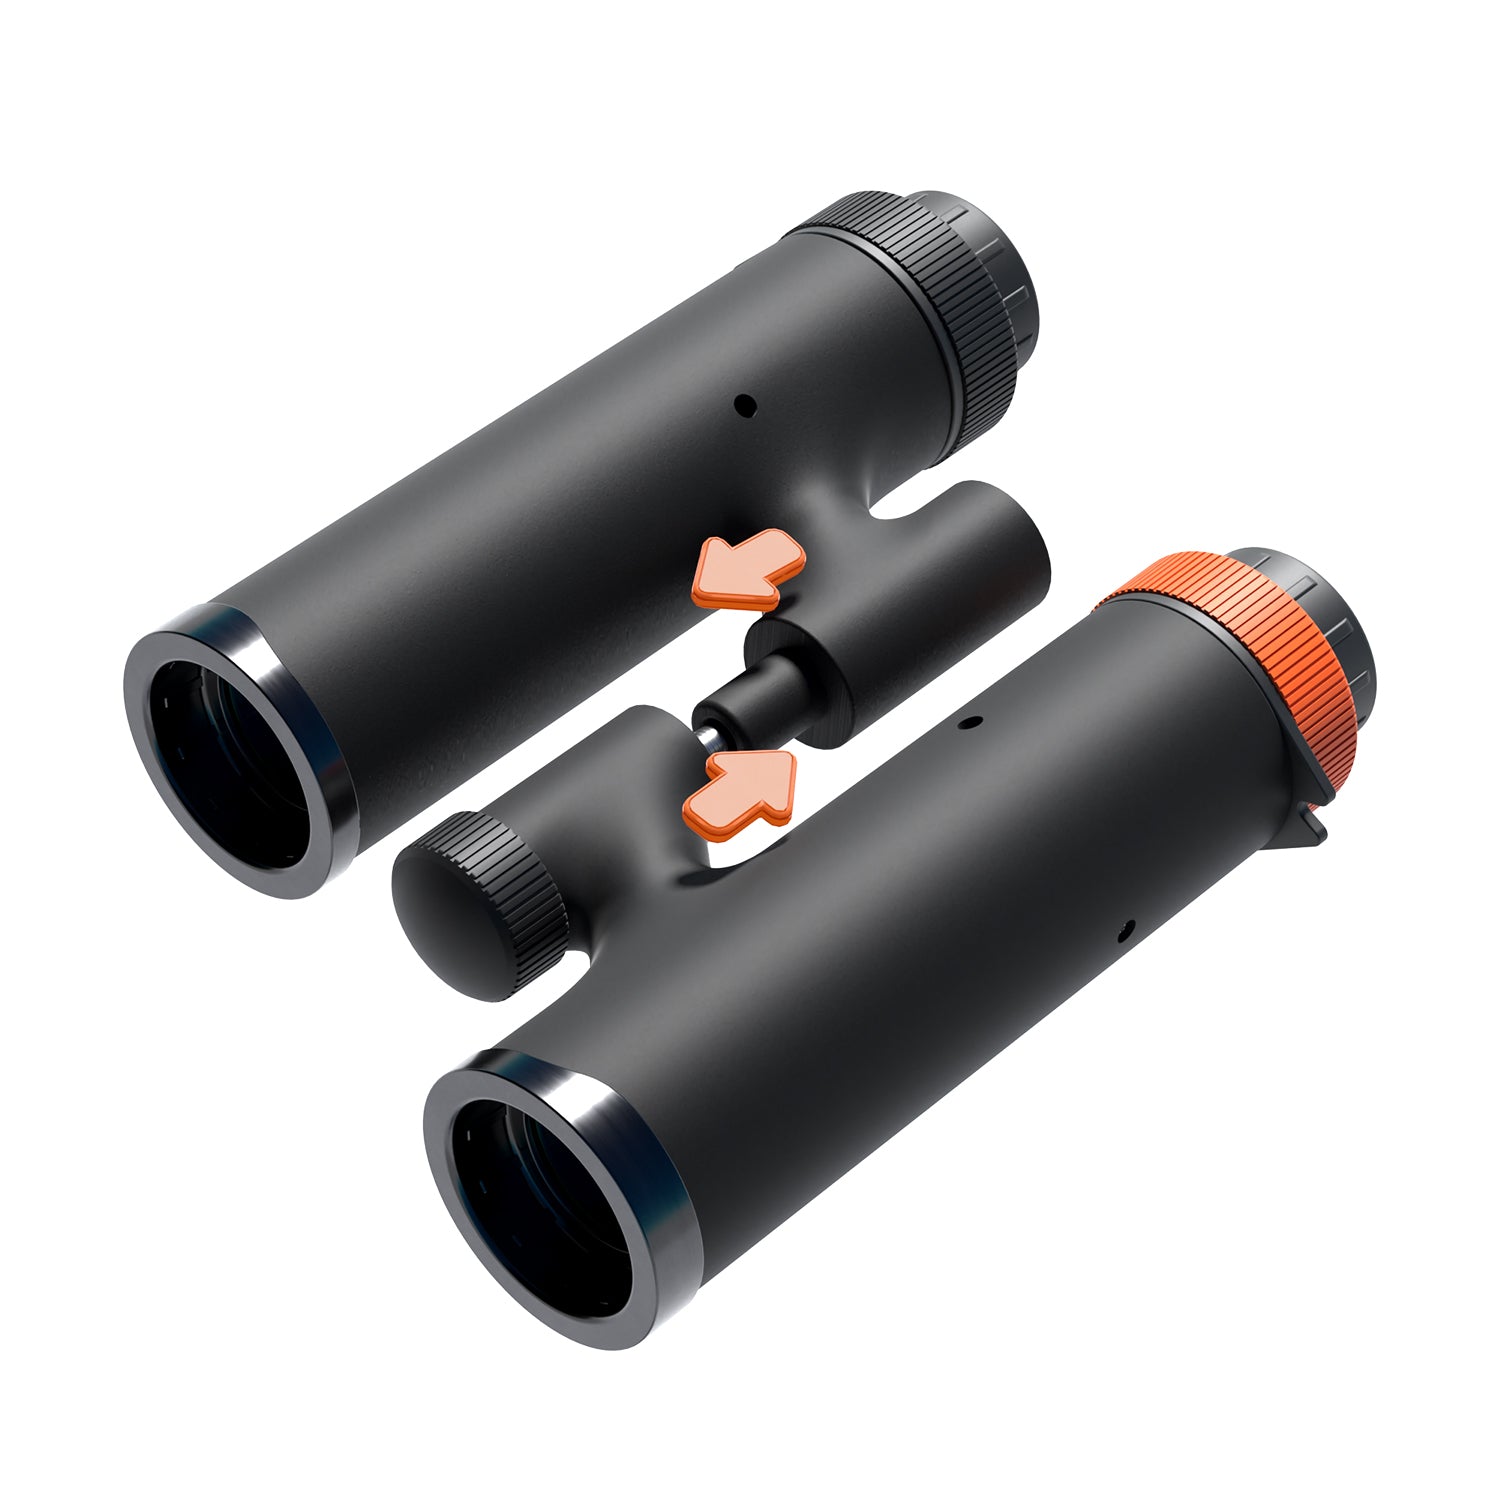 Children easily assemble the two individual monoculars themselves into binoculars.